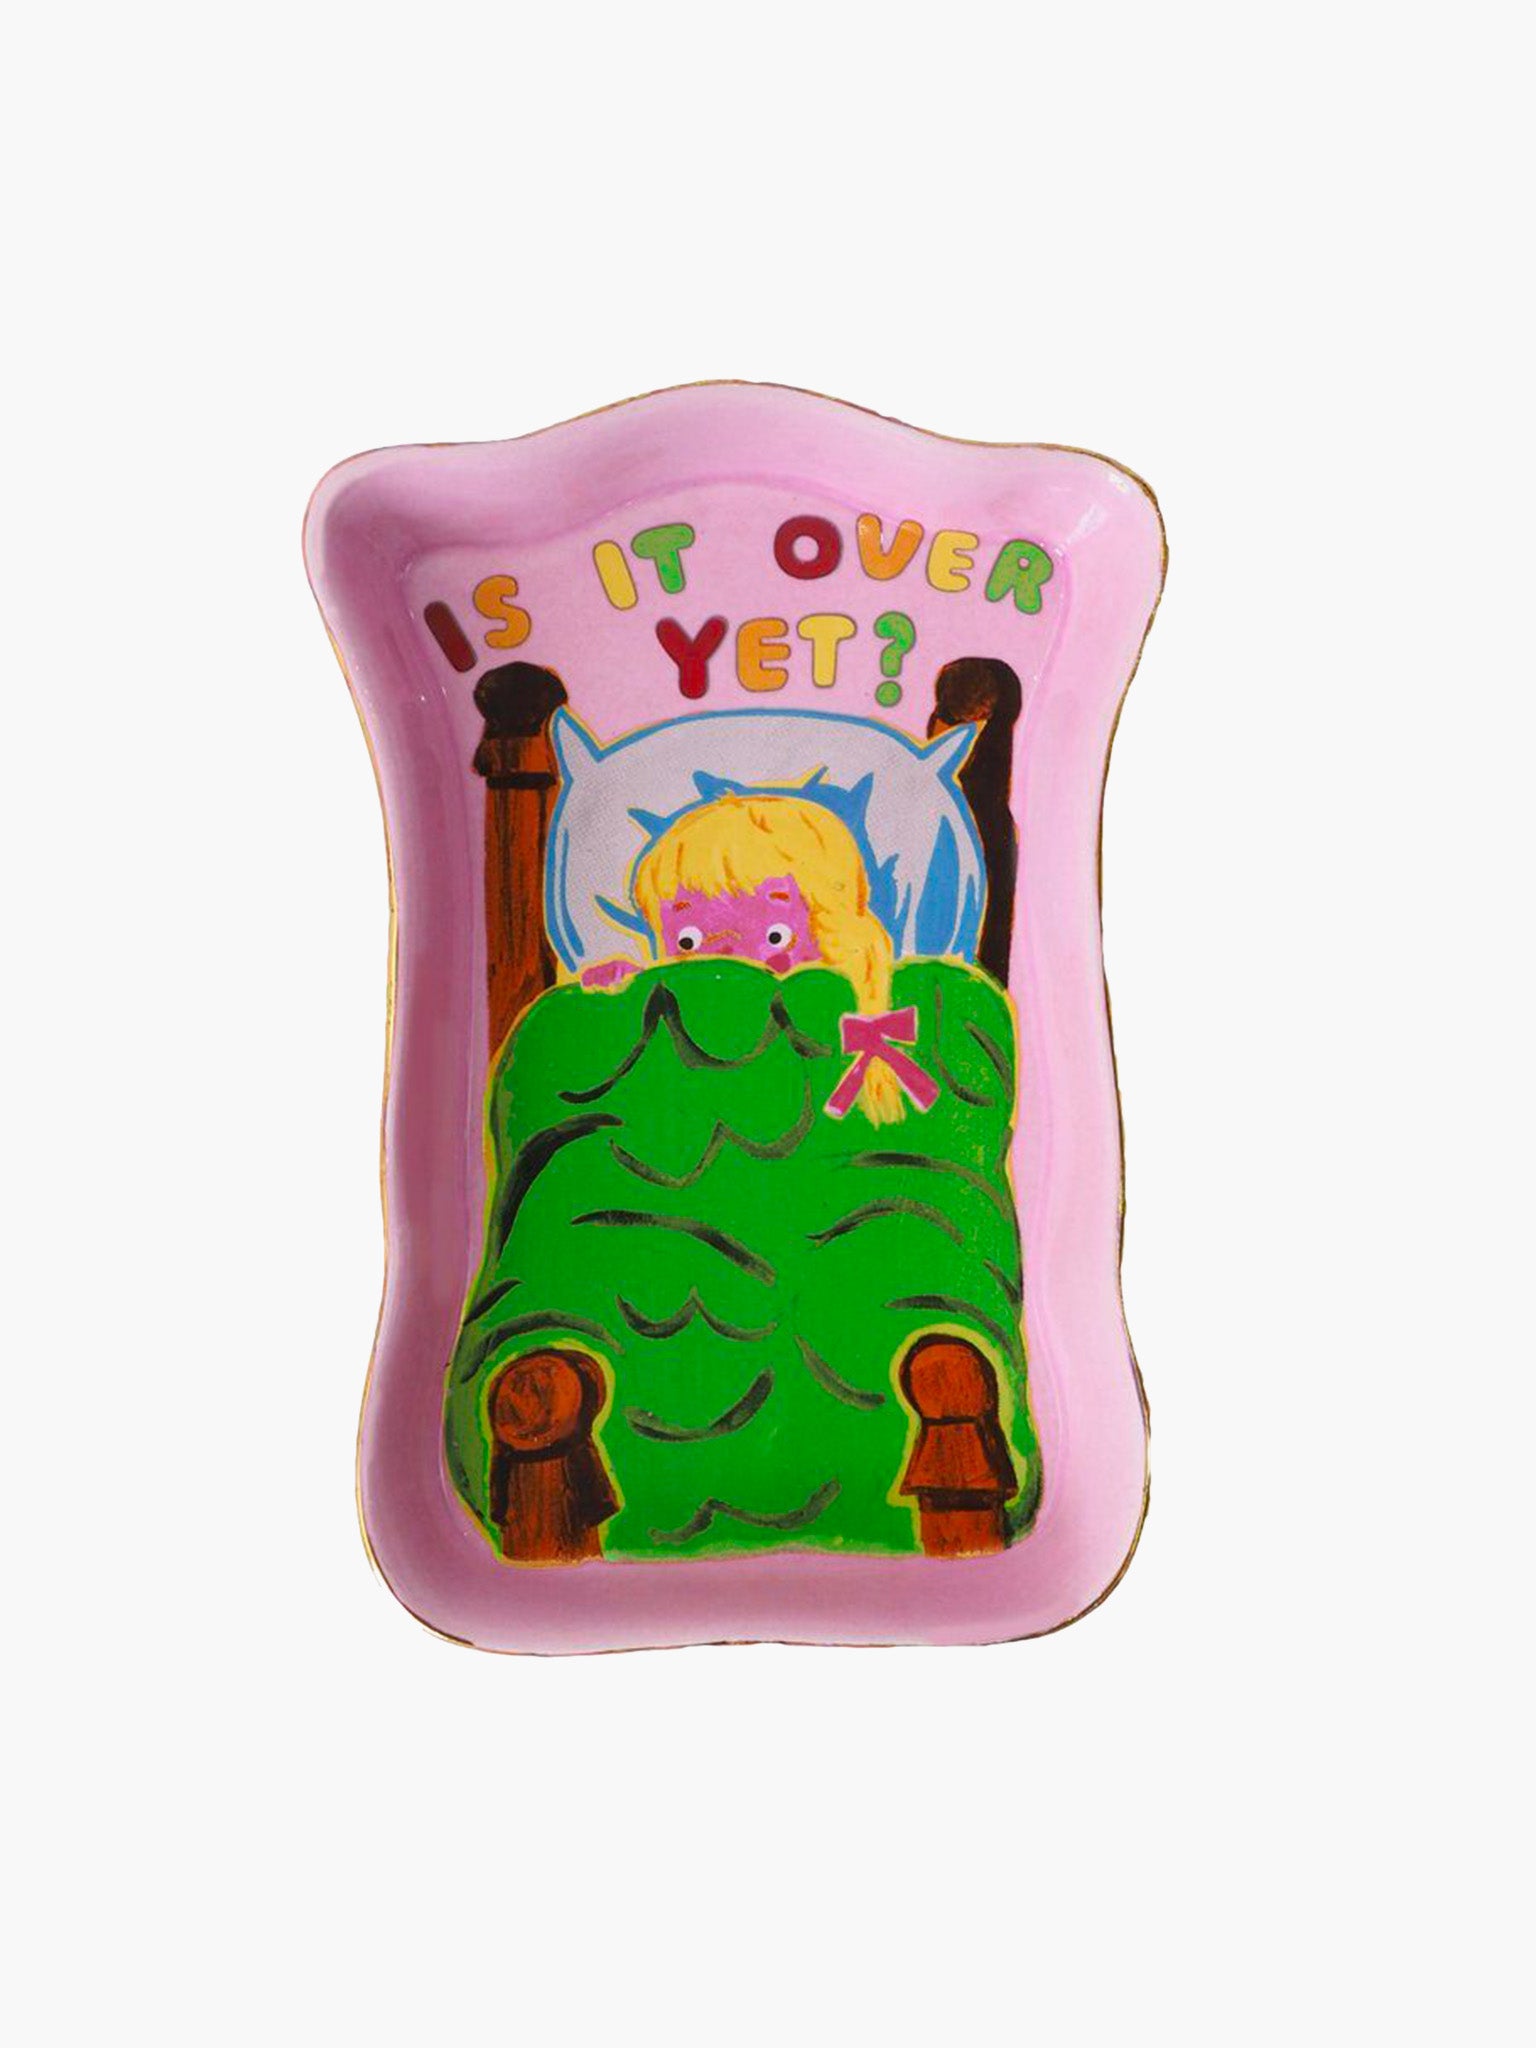 Is It Over Yet Trinket Tray x Magda Archer